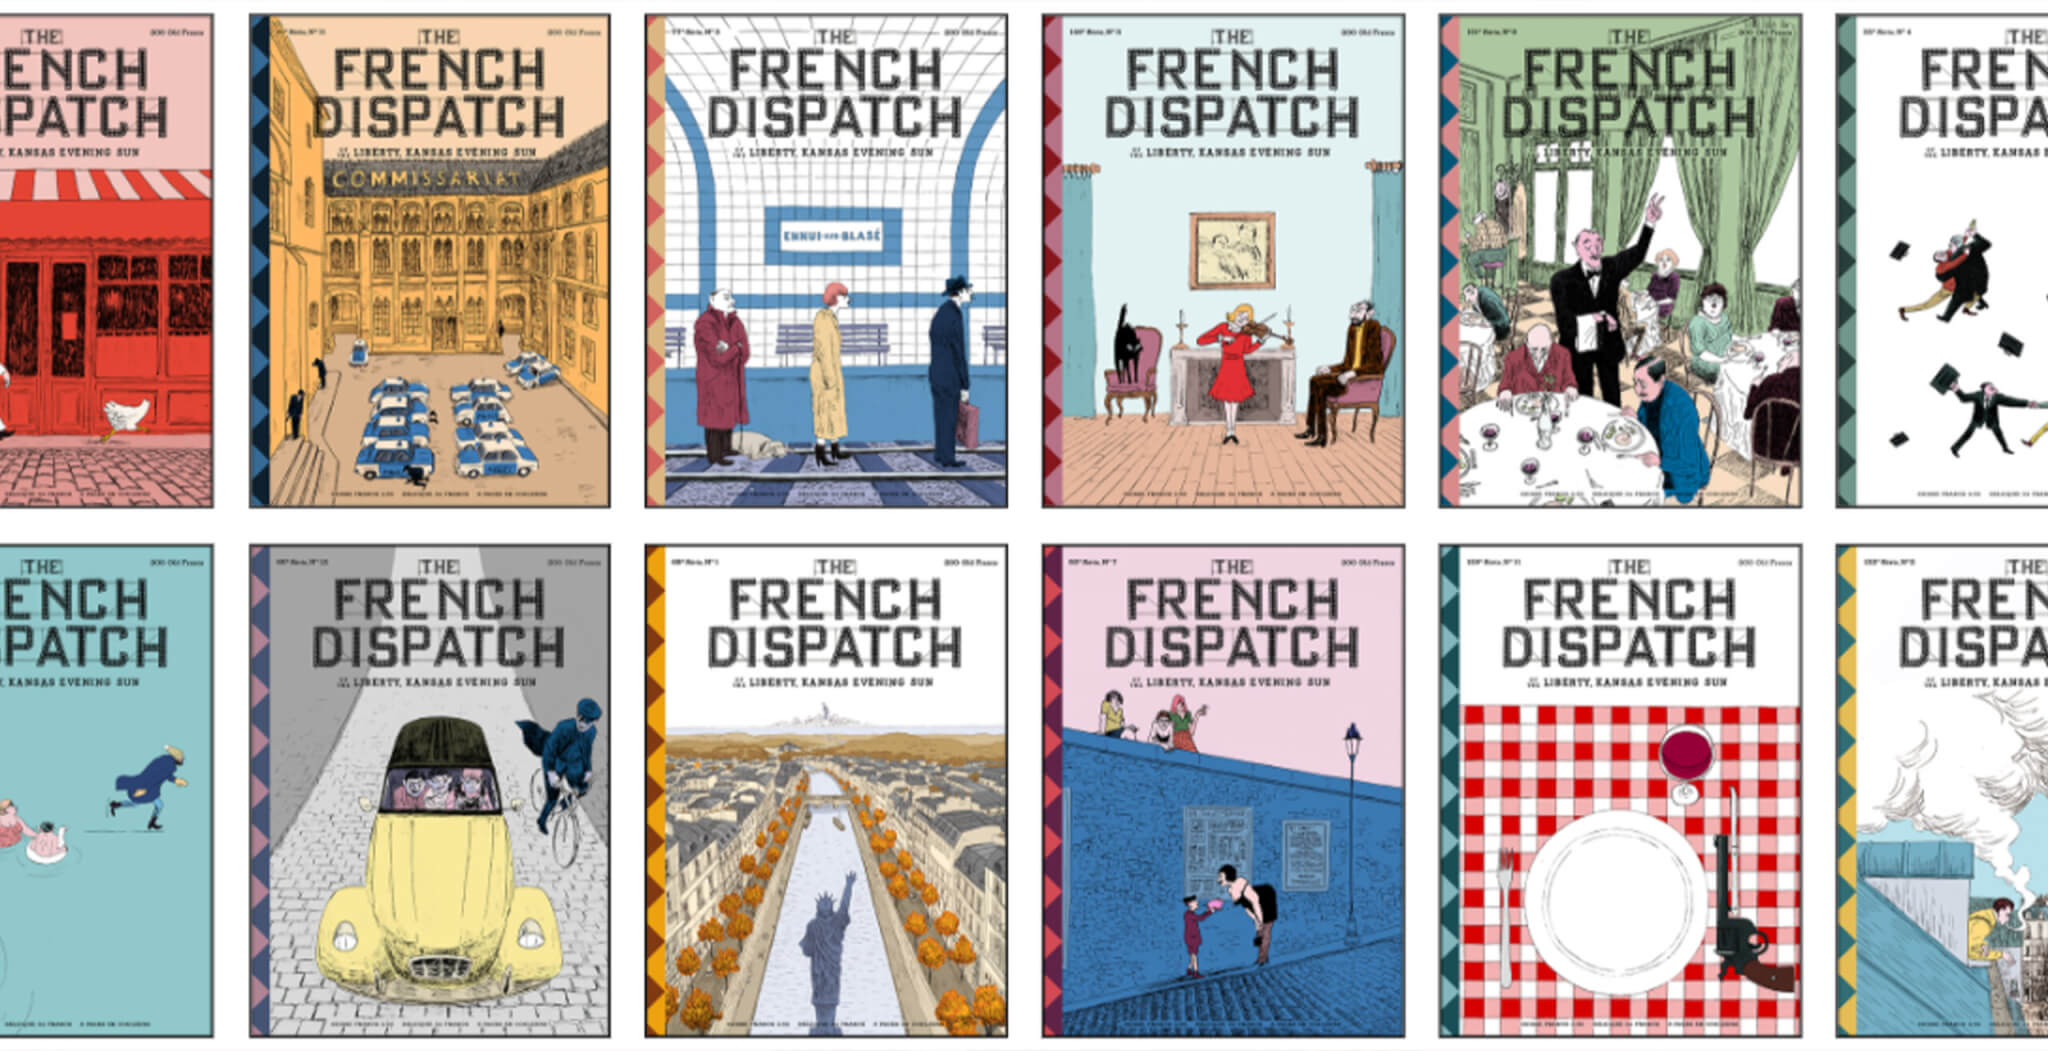 The French Dispatch by Wes Anderson